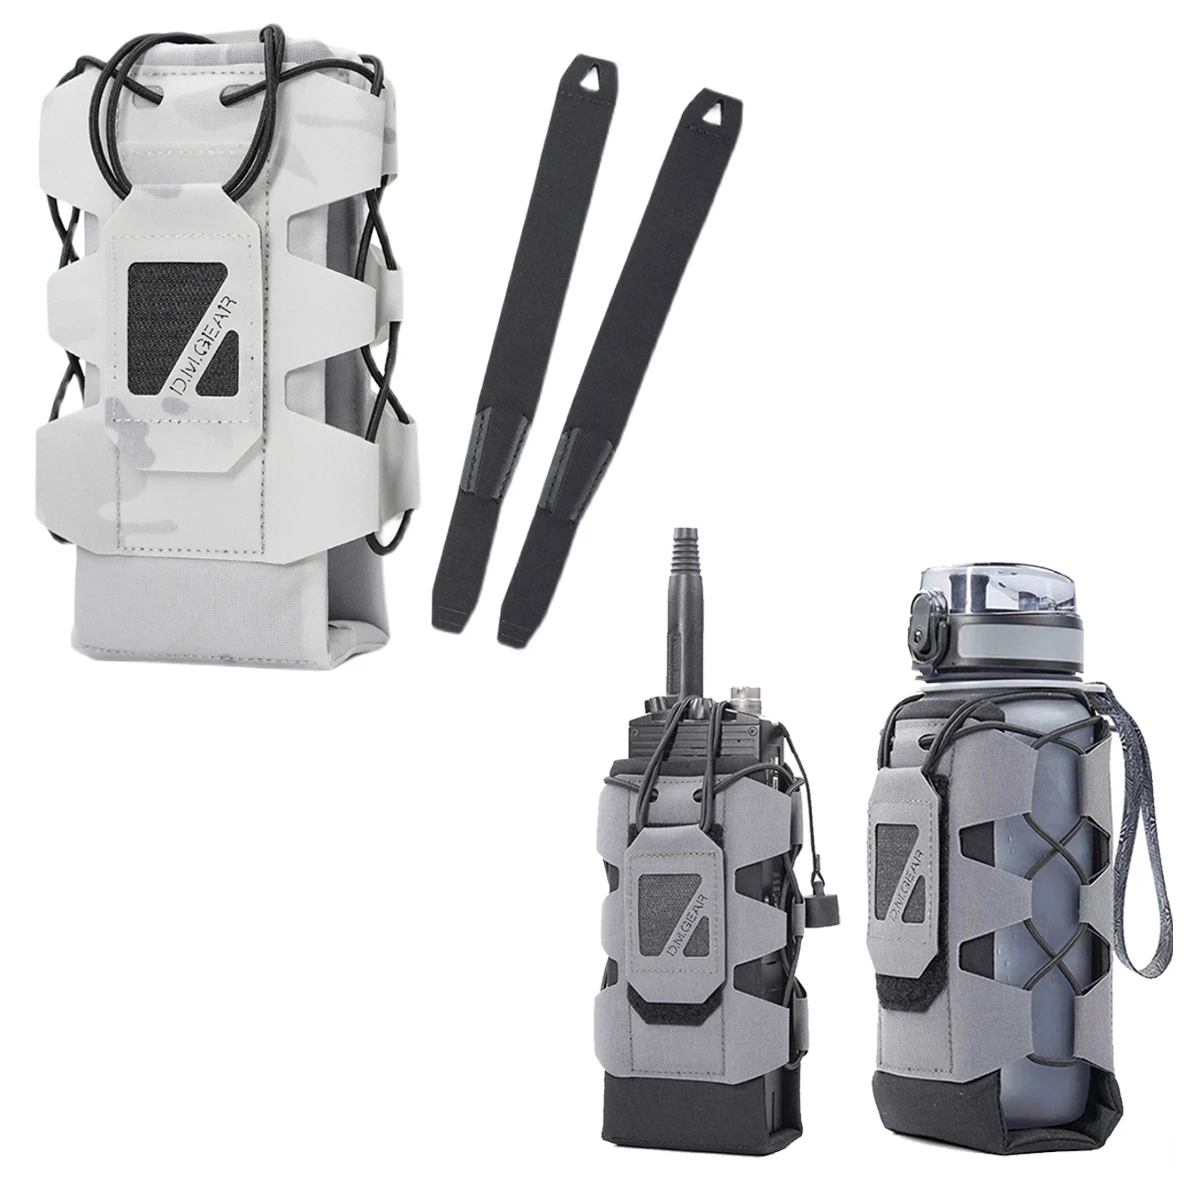 

DMGear Outdoor Tactical Walkie-talkie Bag, Water Bottle Bag, Multi-functional MOLLE Sub-bag, Radio Bag, Protective Cover